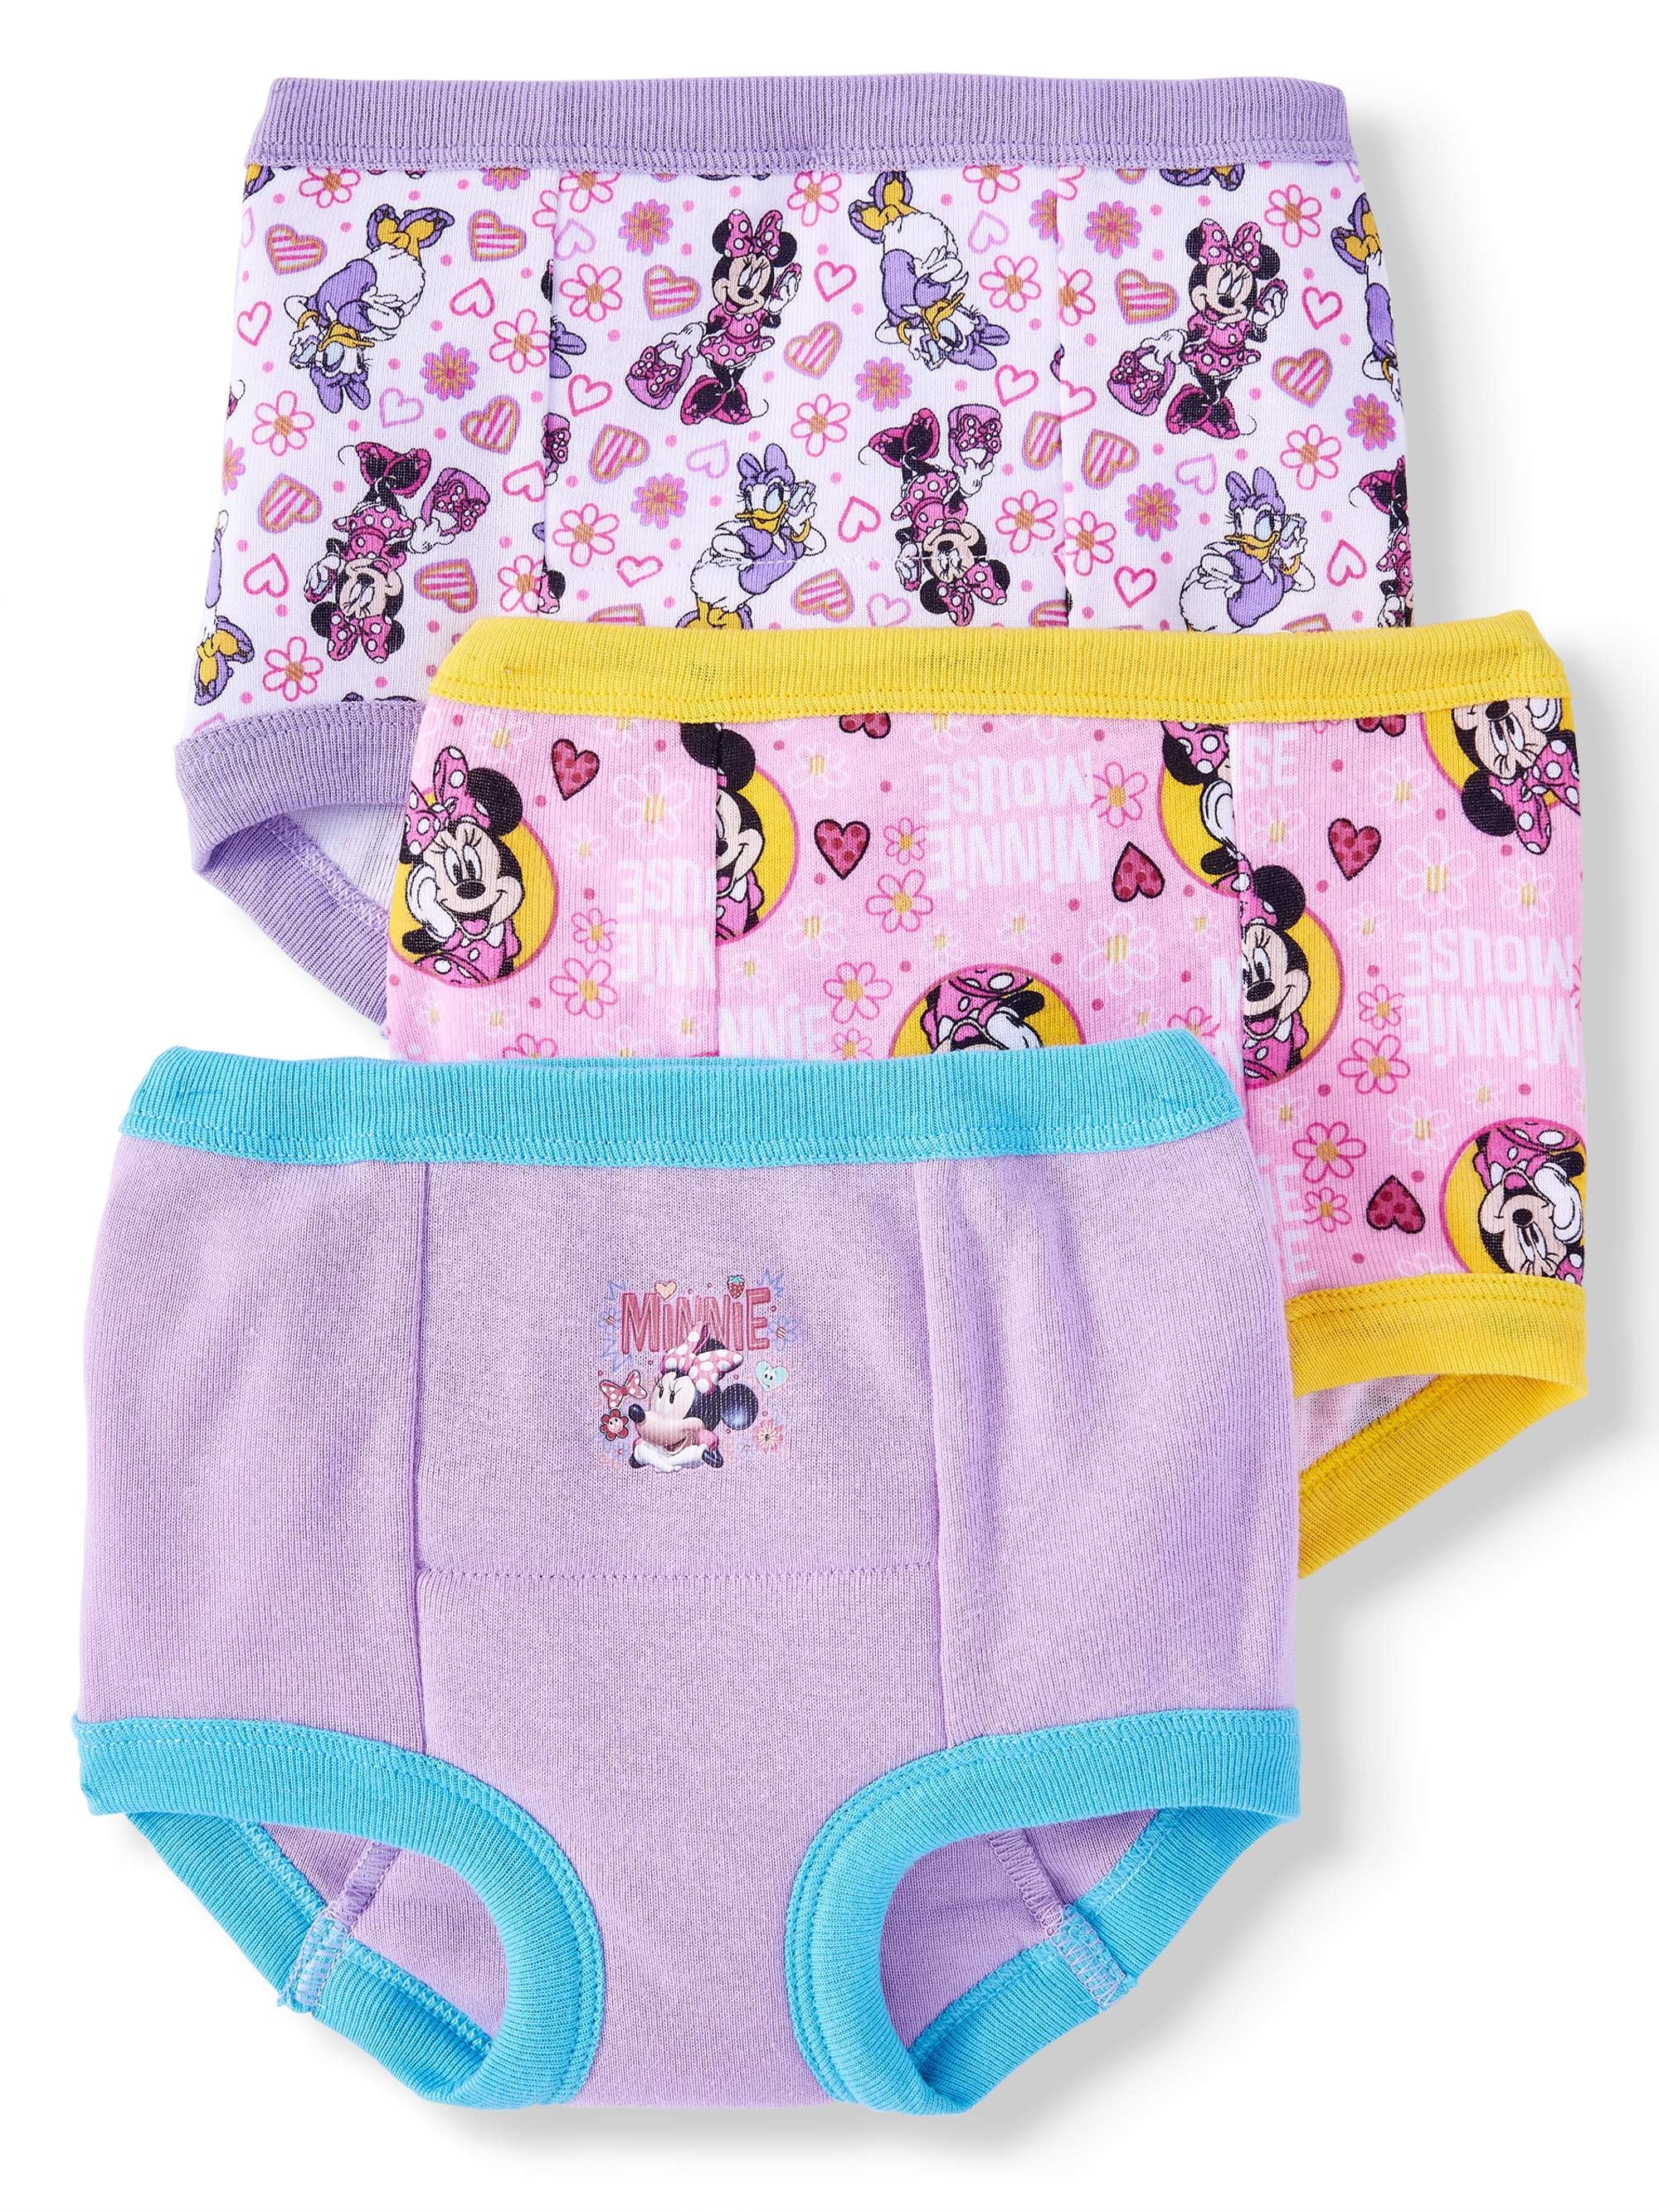 Minnie Mouse Toddler Girls' 3-Pack Training Pants